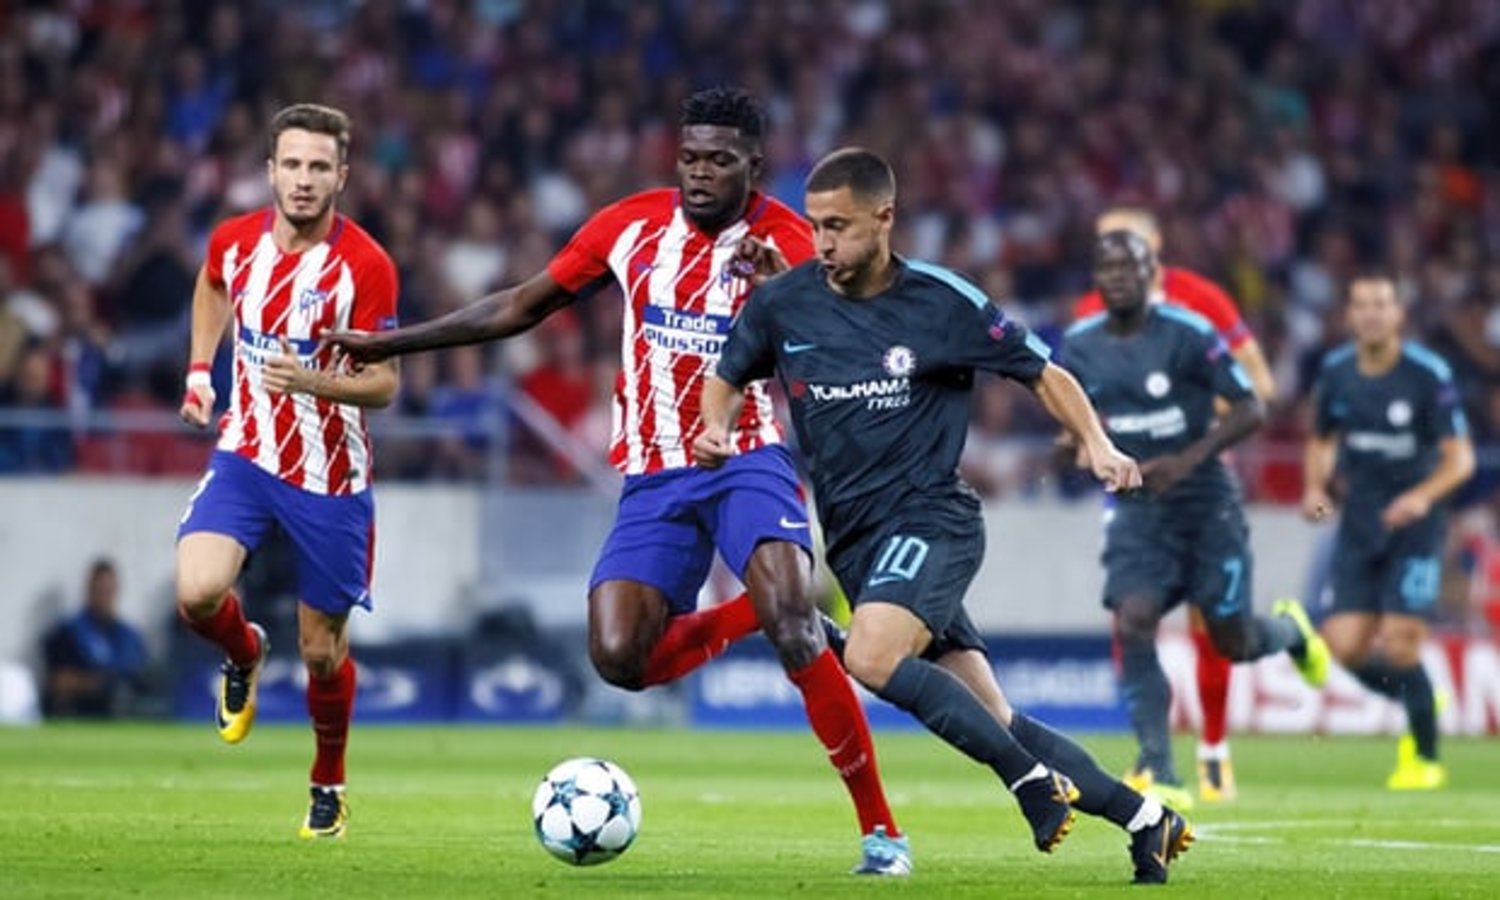  Eden Hazard stood out for Chelsea even in a highly impressive team performance against Atlético Madrid. Photograph: Anadolu Agency/Getty Images  